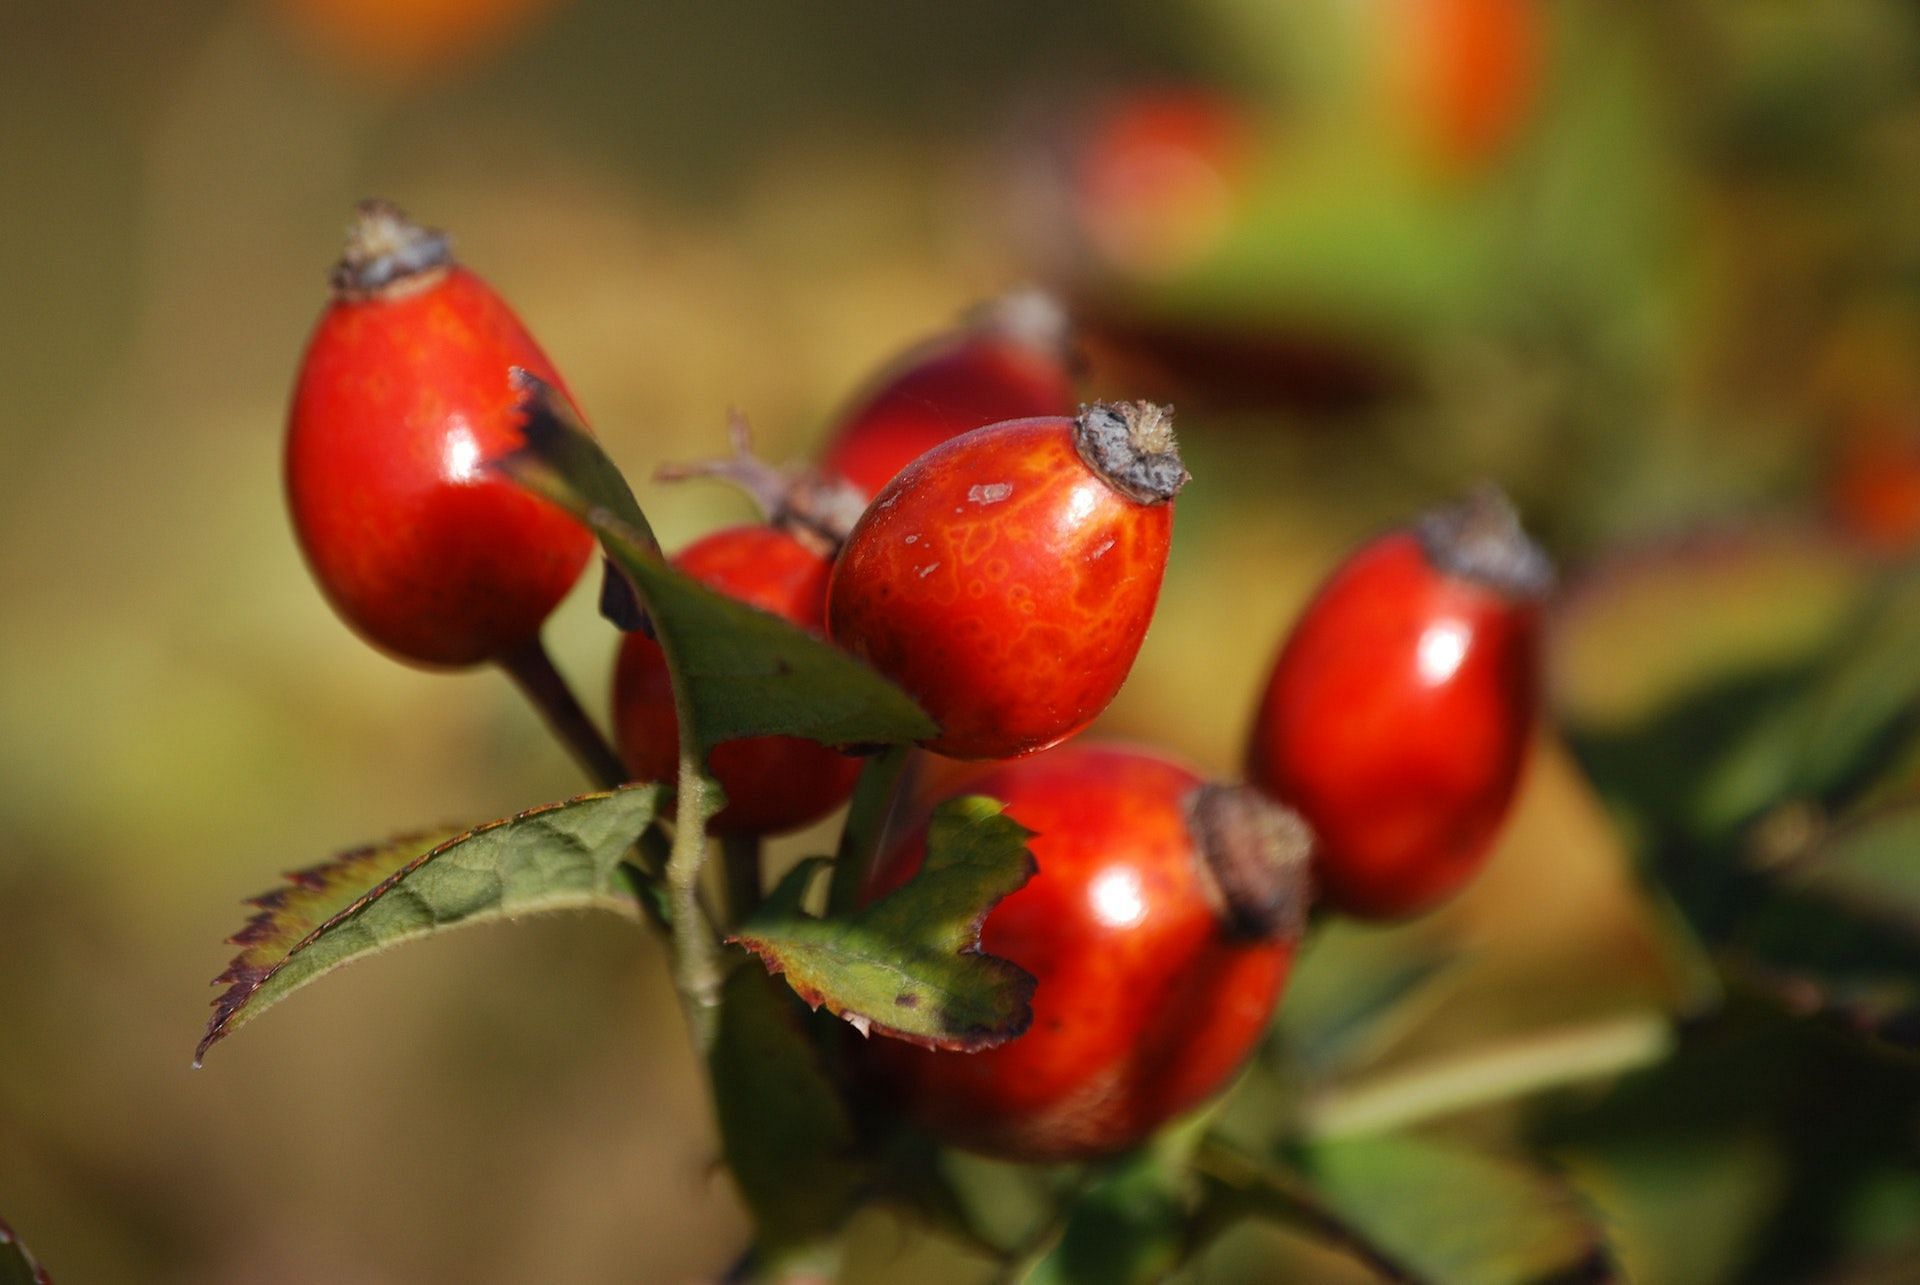 Rosehips are seed-filled parts of roses.  (Photo via Pexels/Pixabay)